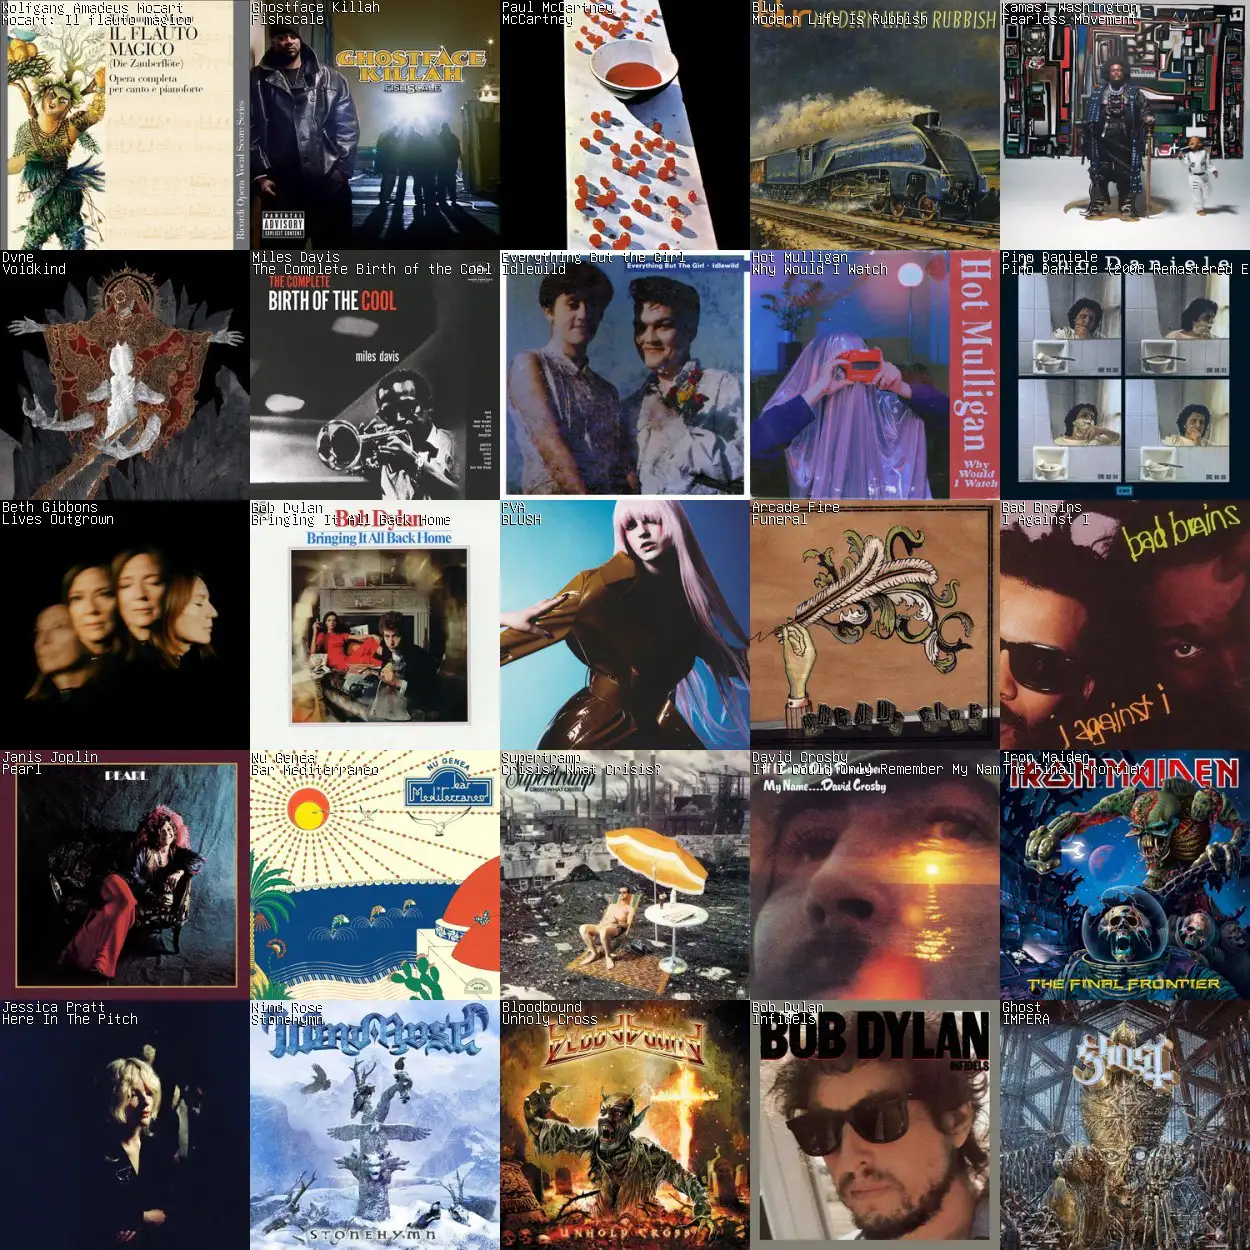 The top 25 albums of May 2024. Including Mozart&rsquo;s Die Zauberflöte, Ghostface Killah&rsquo;s Fishscale, Miles Davis&rsquo; Birth of the Cool, Dvne&rsquo;s Voidkind, and more.